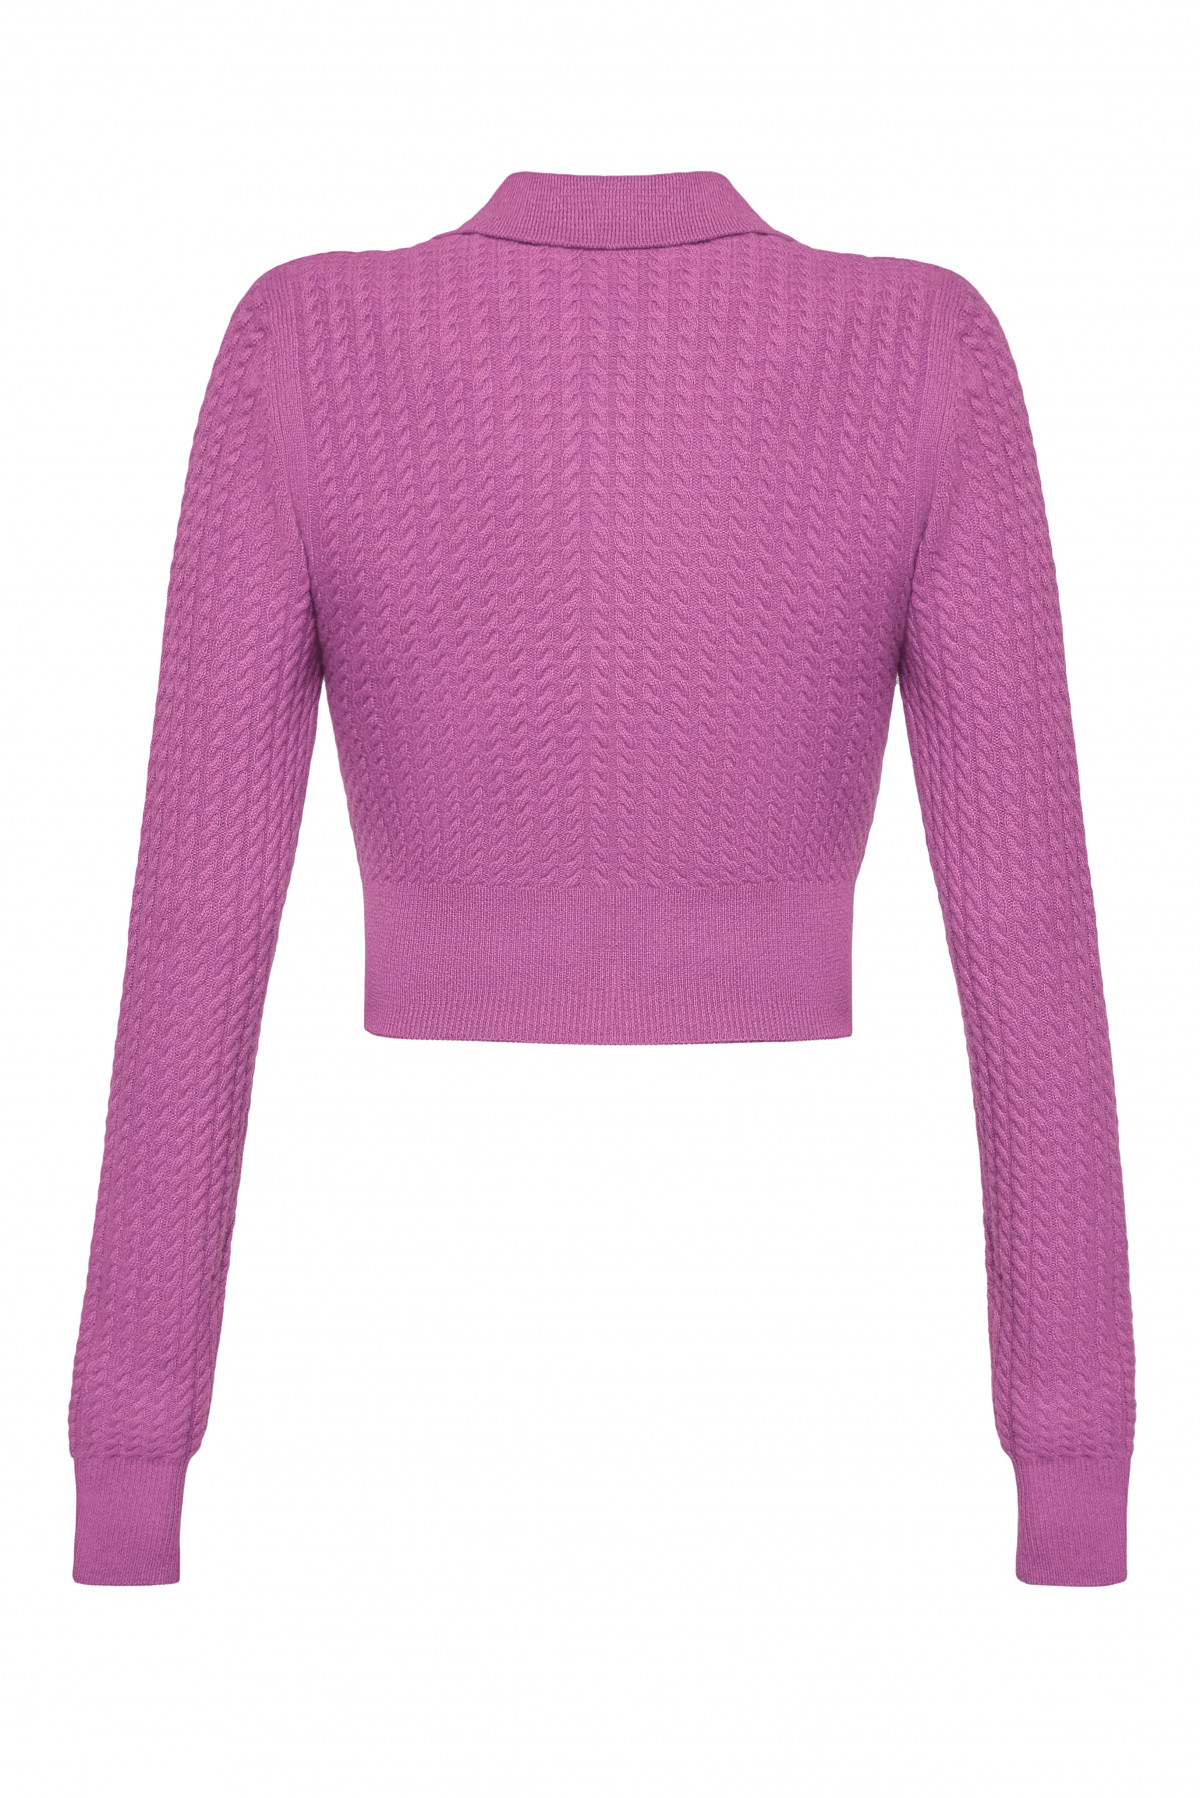 GEORGE KEBURIA - CABLE-KNIT WOOL-CASHMERE SWEATER